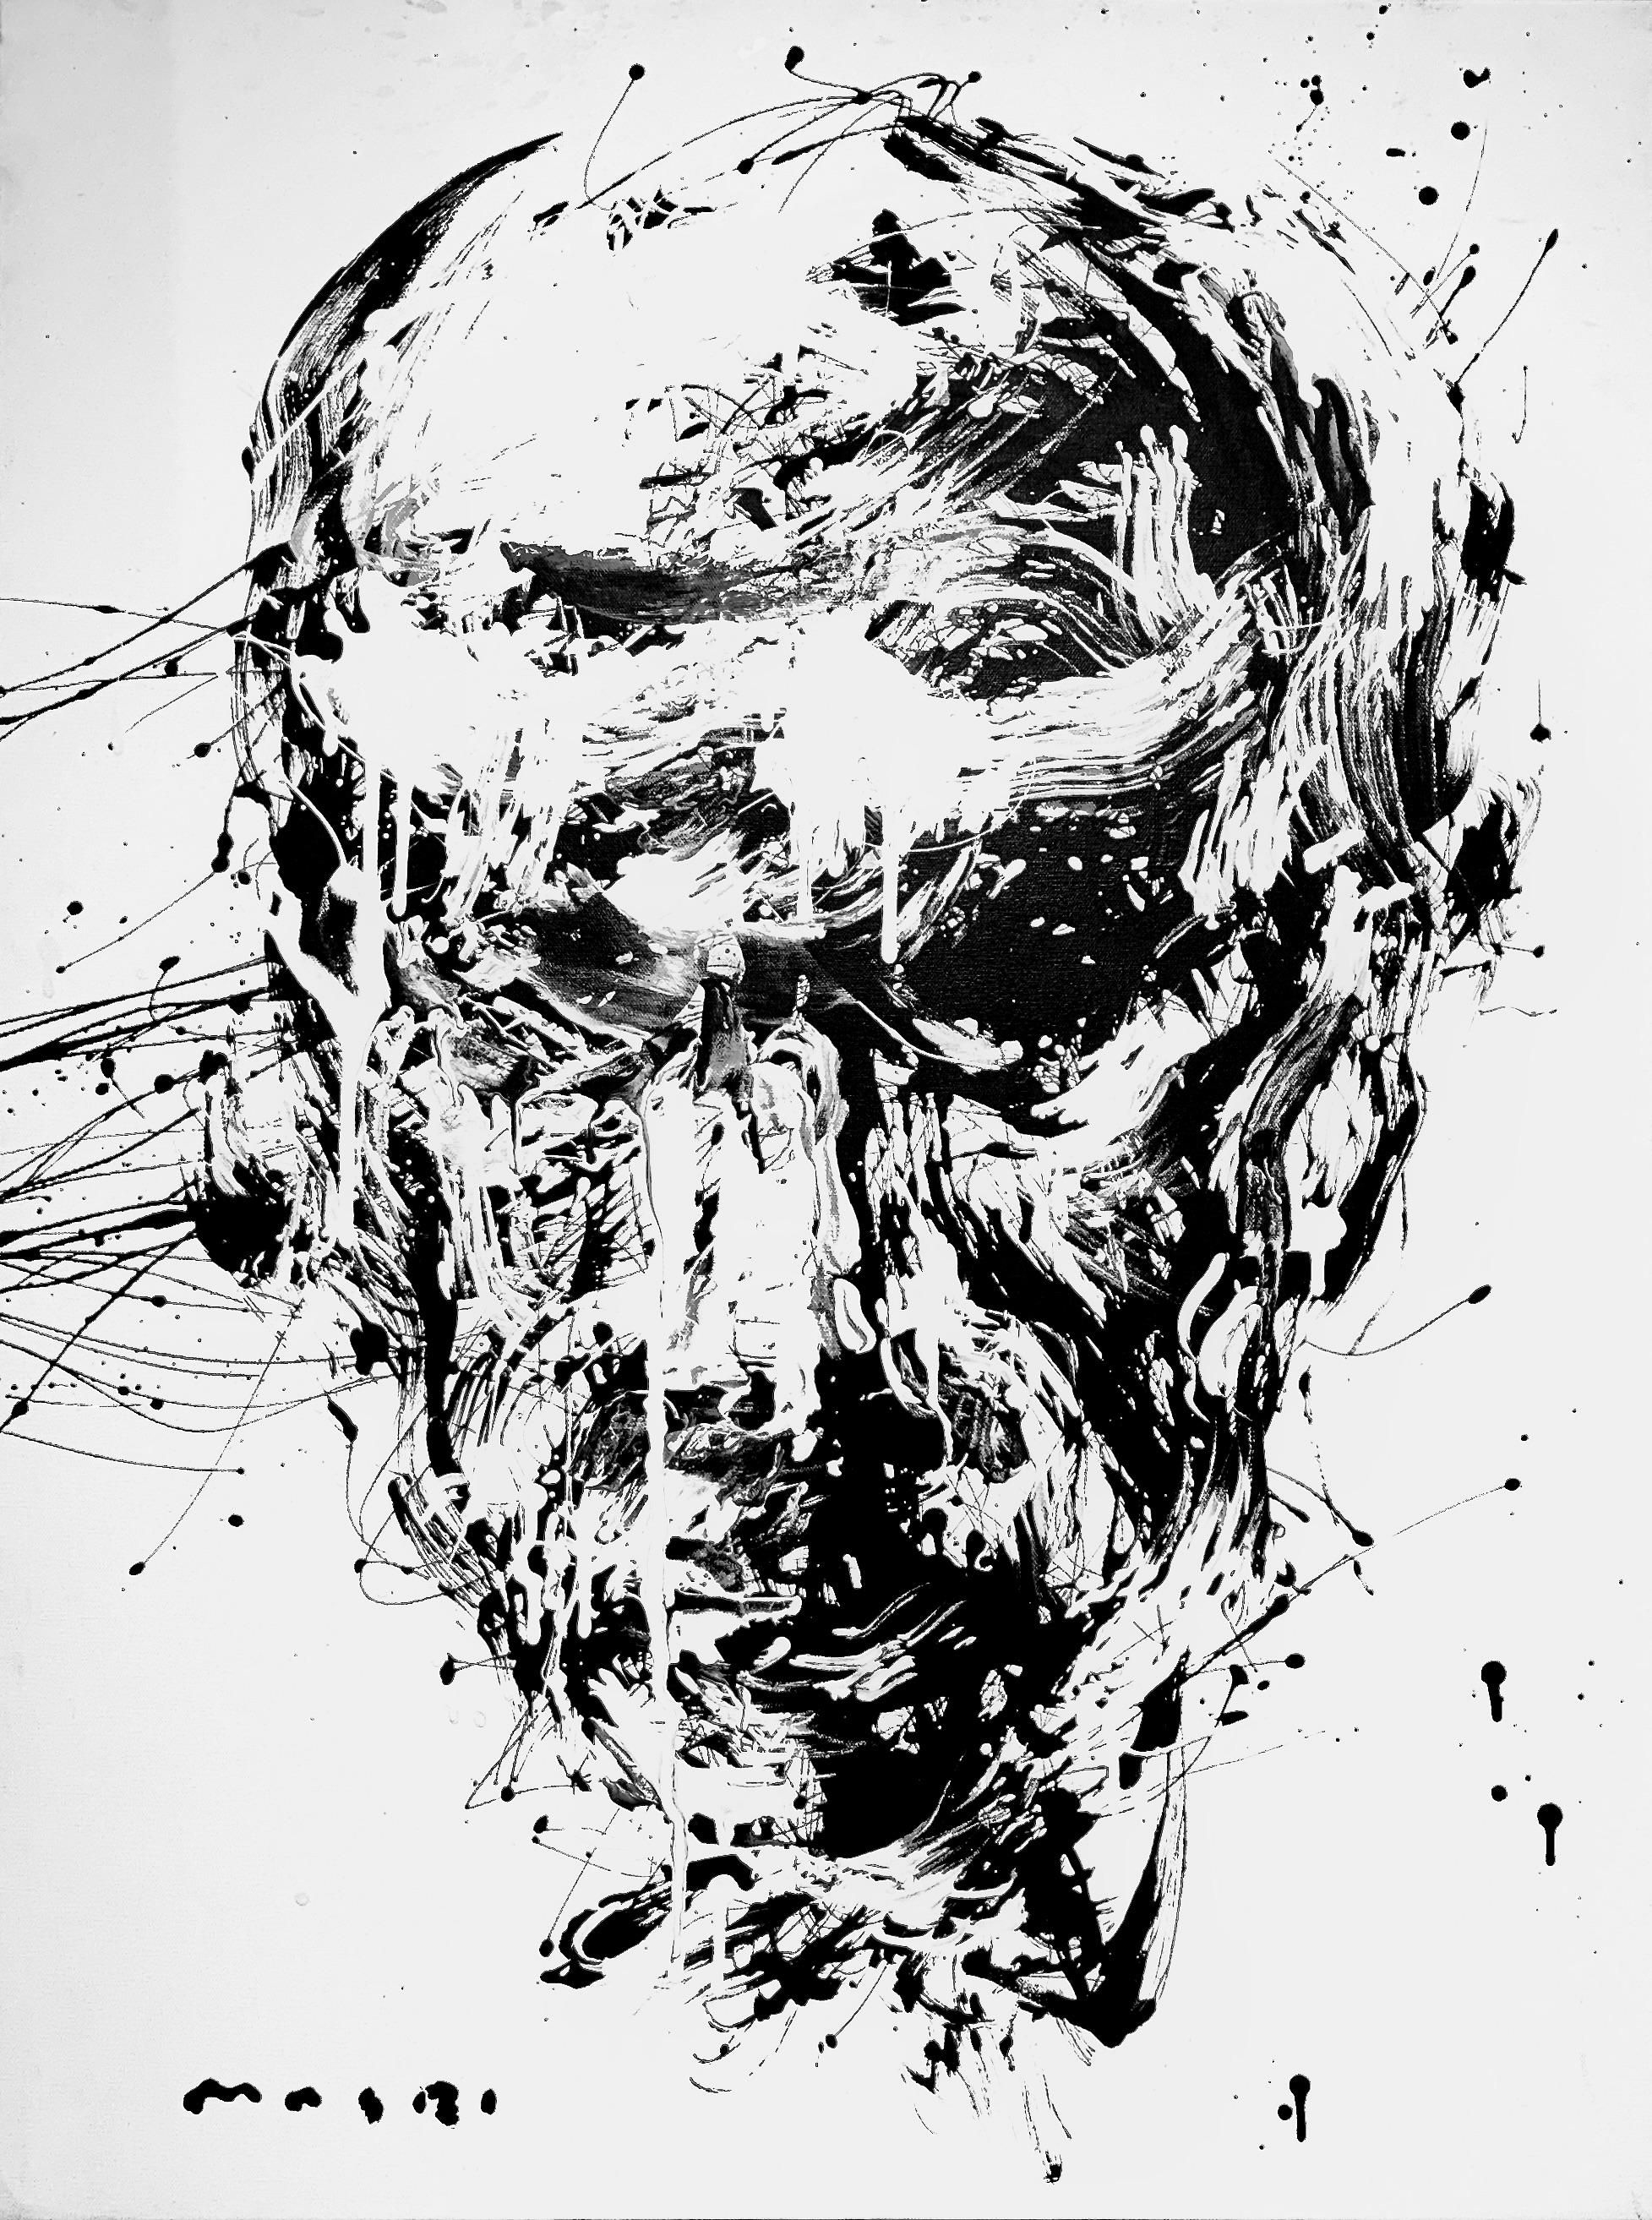 'Stoic' by Masri - Black and White Abstract Portrait - Mixed Media Painting